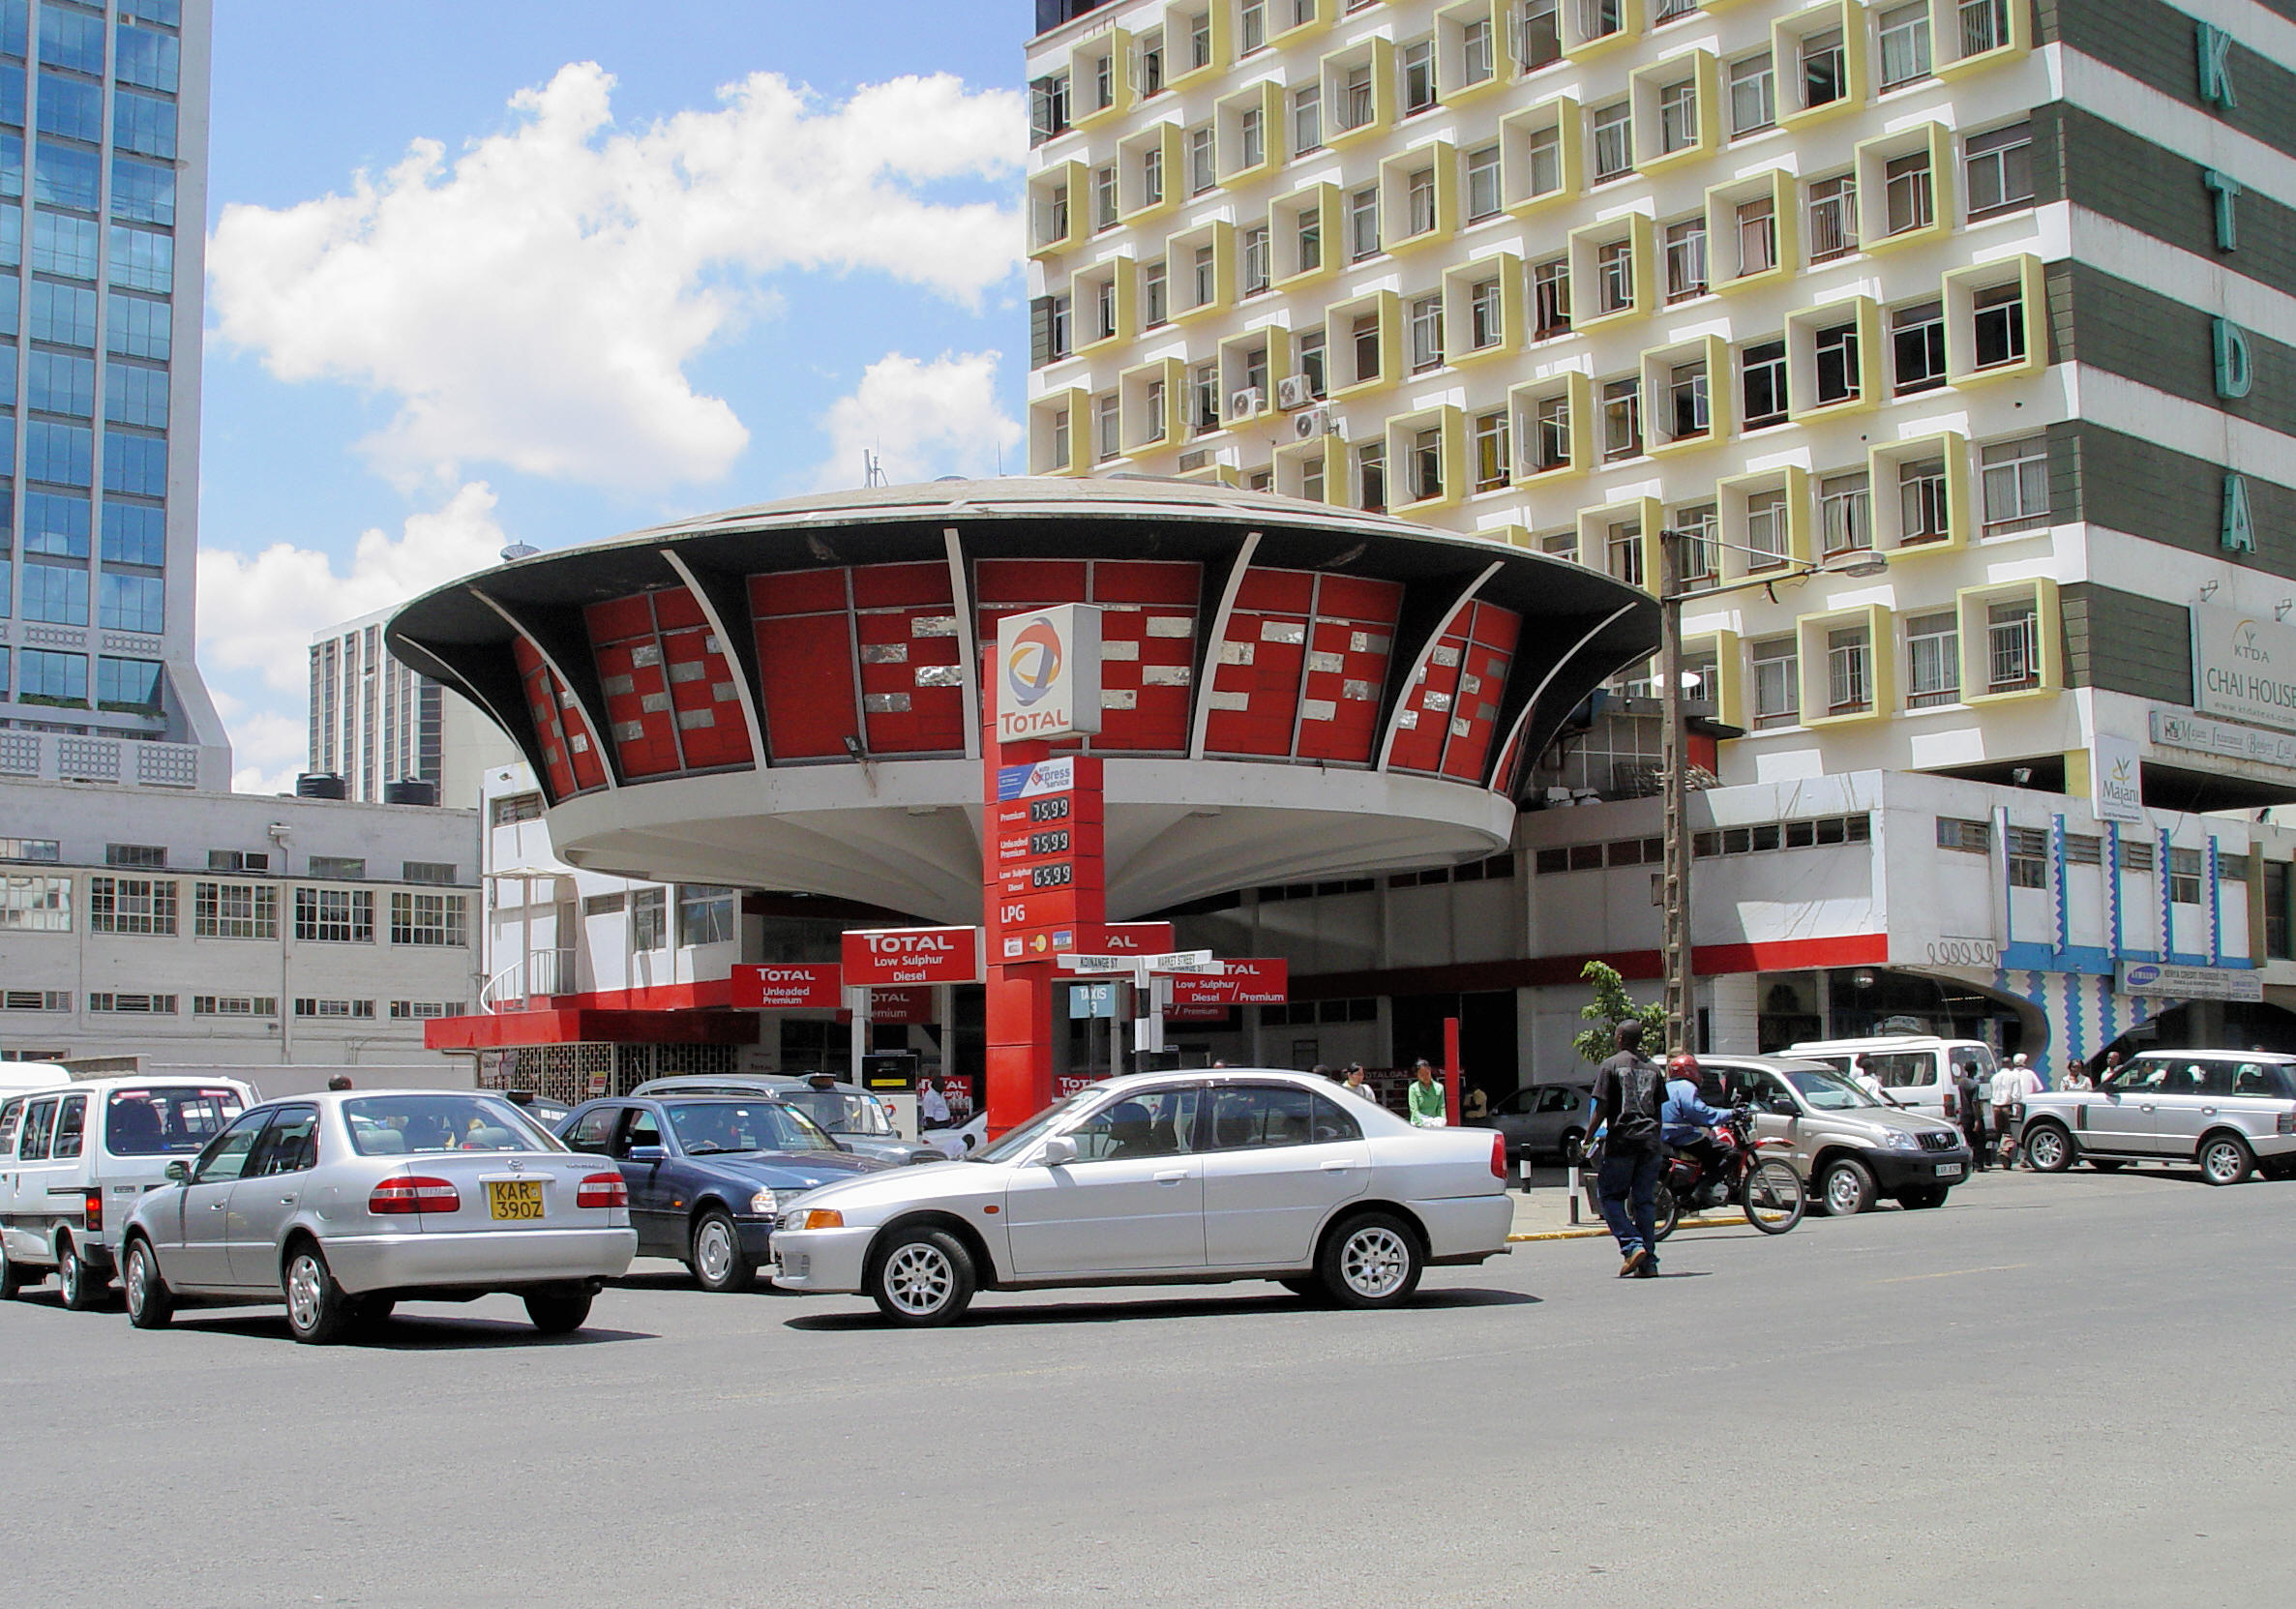 Nairobi's Infamous "Madhouse" Nightclub (the saucer building)